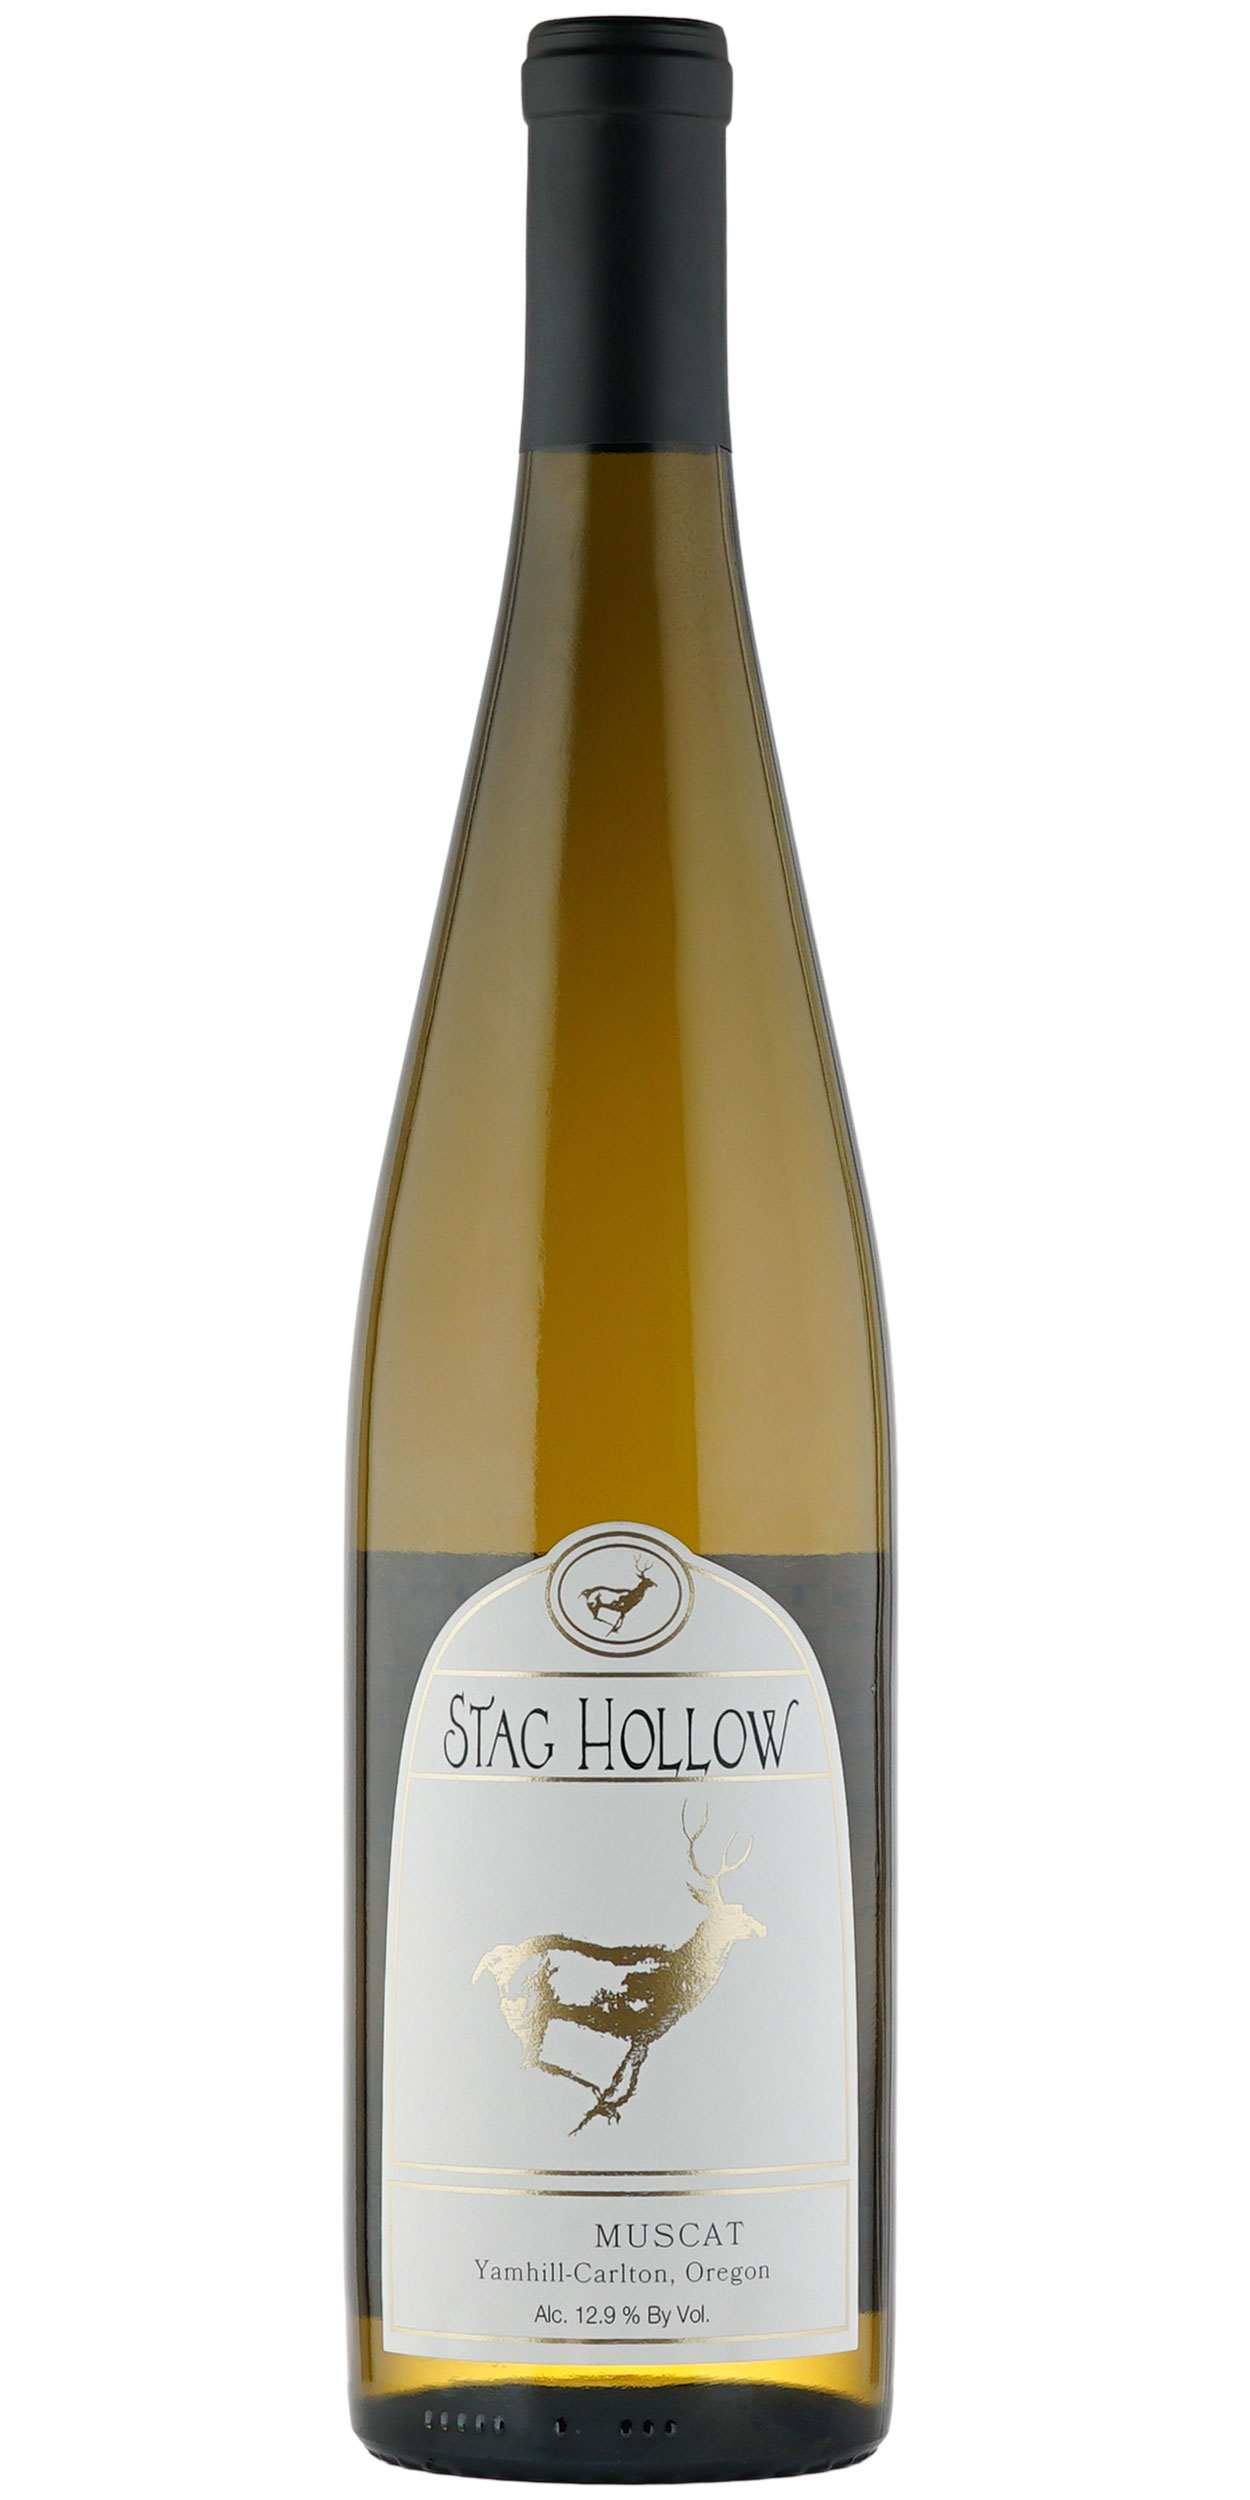 Bottle of Stag Hollow Muscat